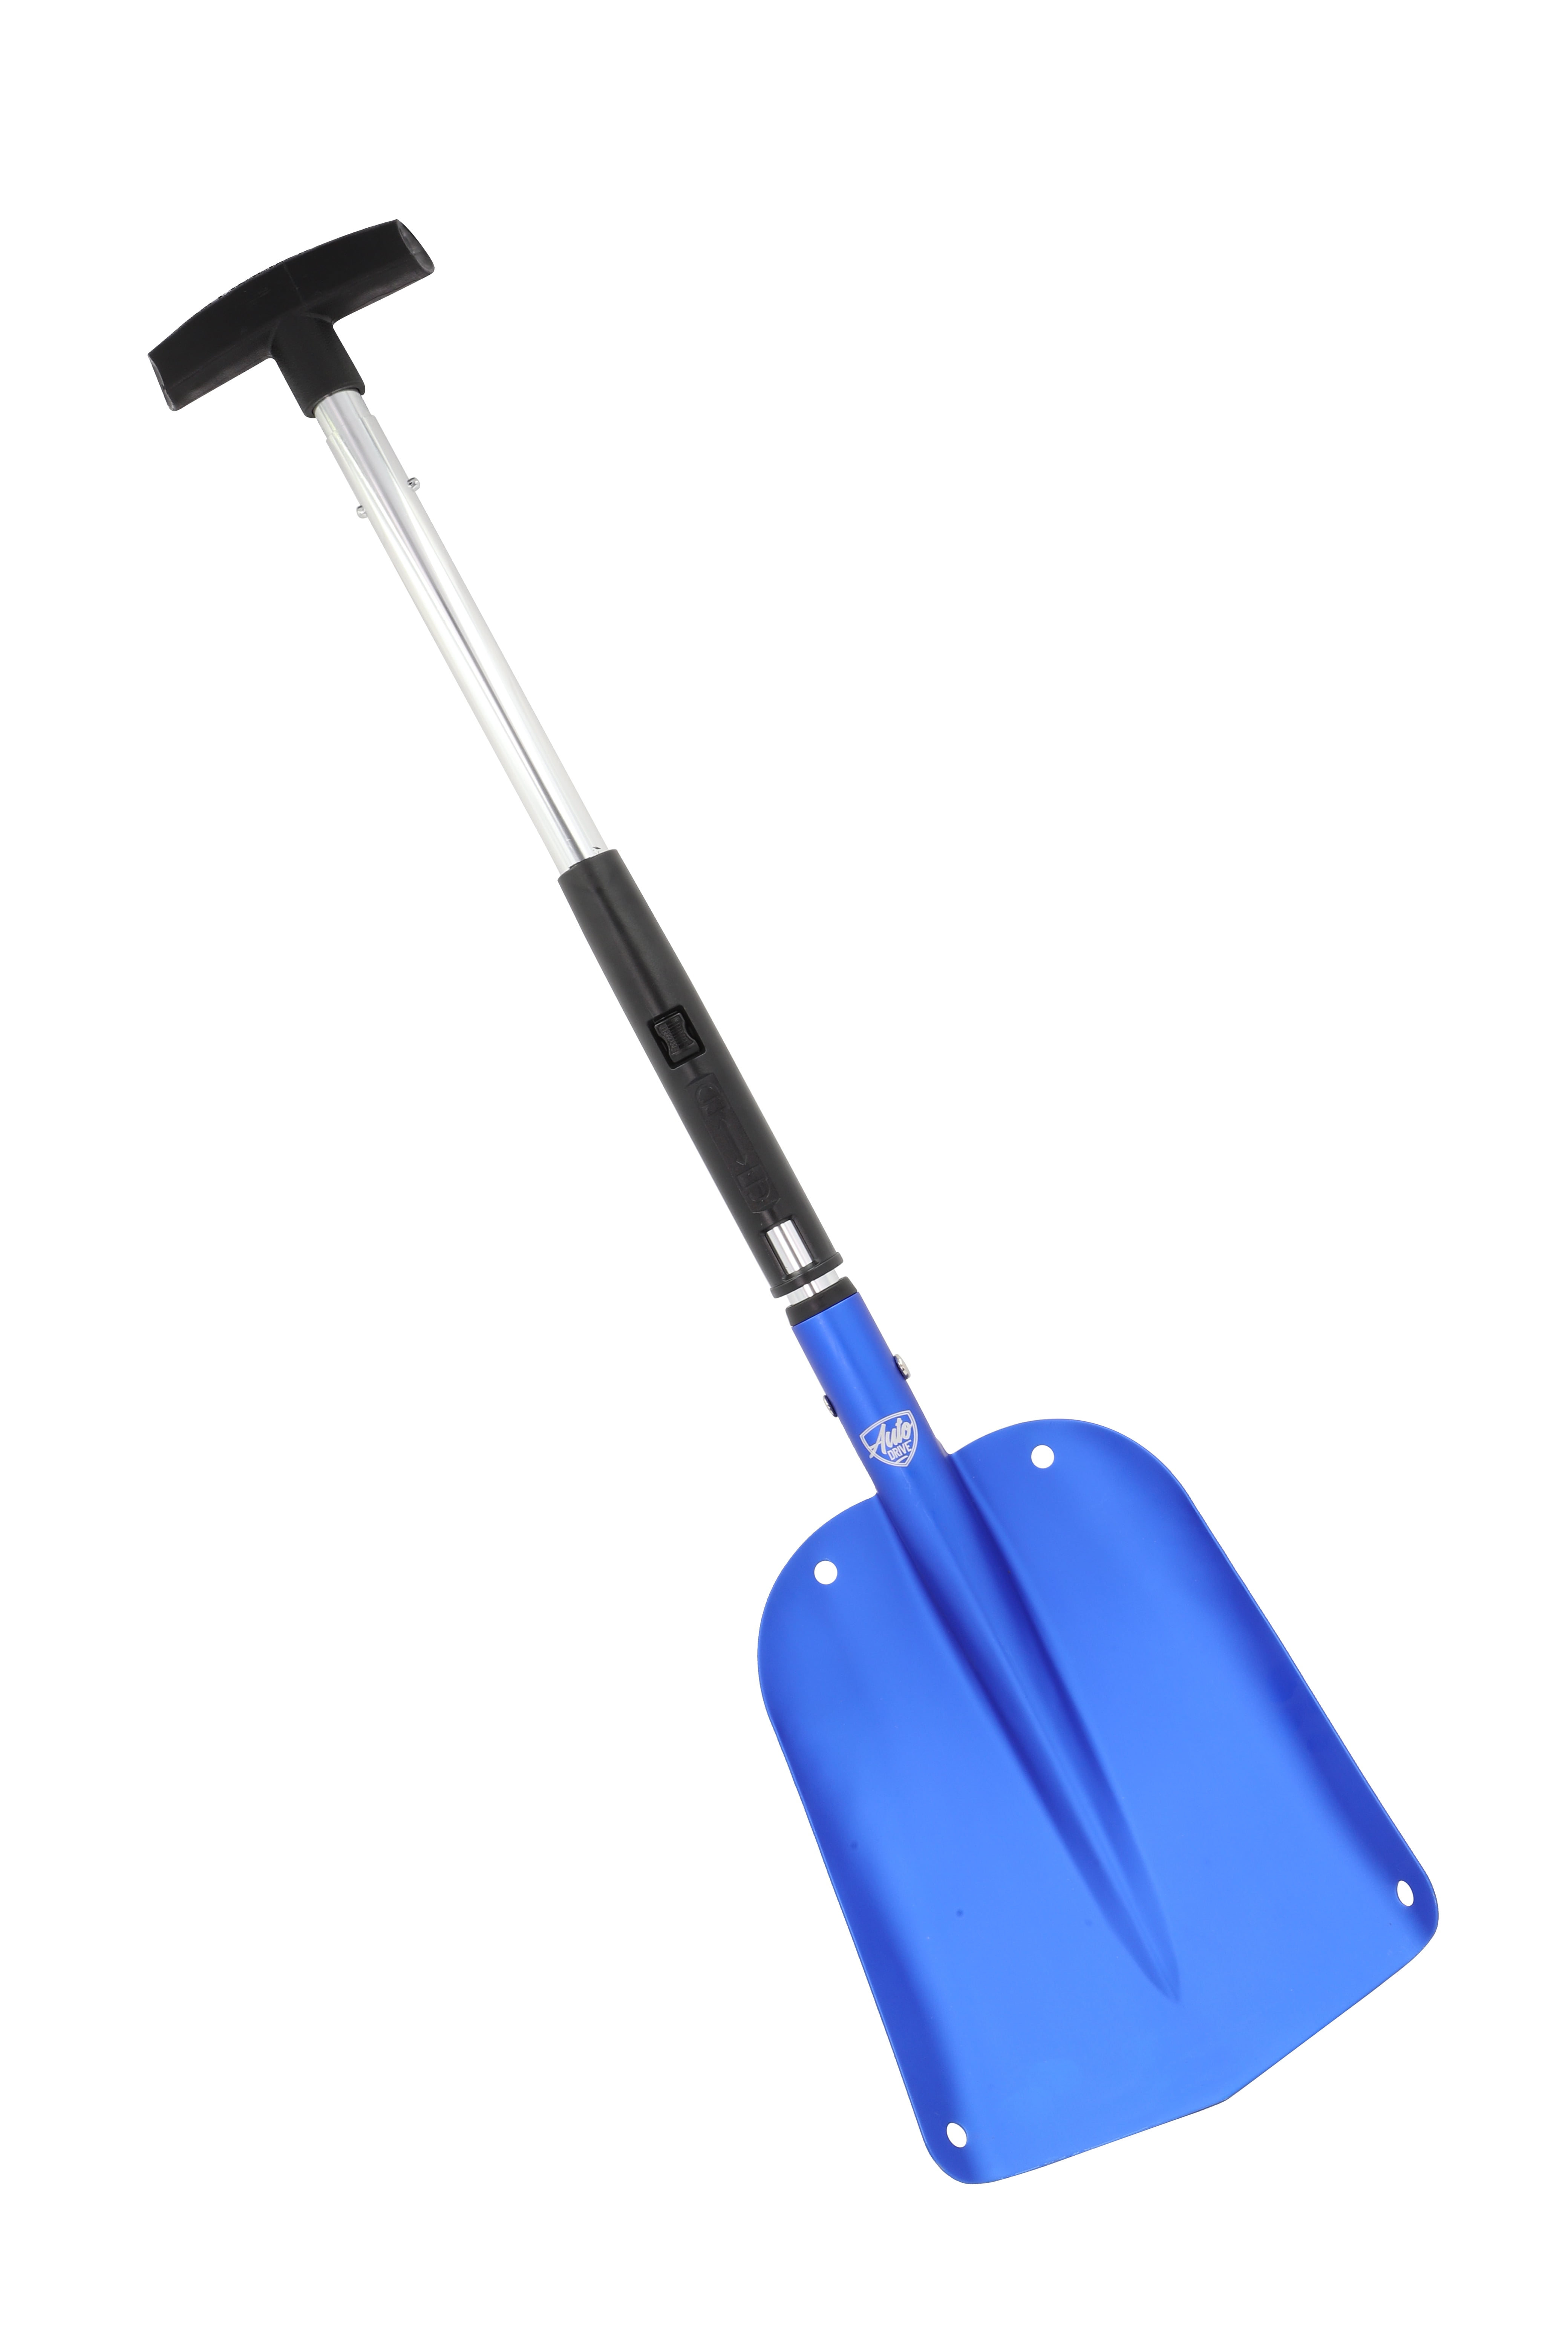 Auto Drive Aluminum Emergency Winter Shovel with Metal Shaft and T-Grip Handle